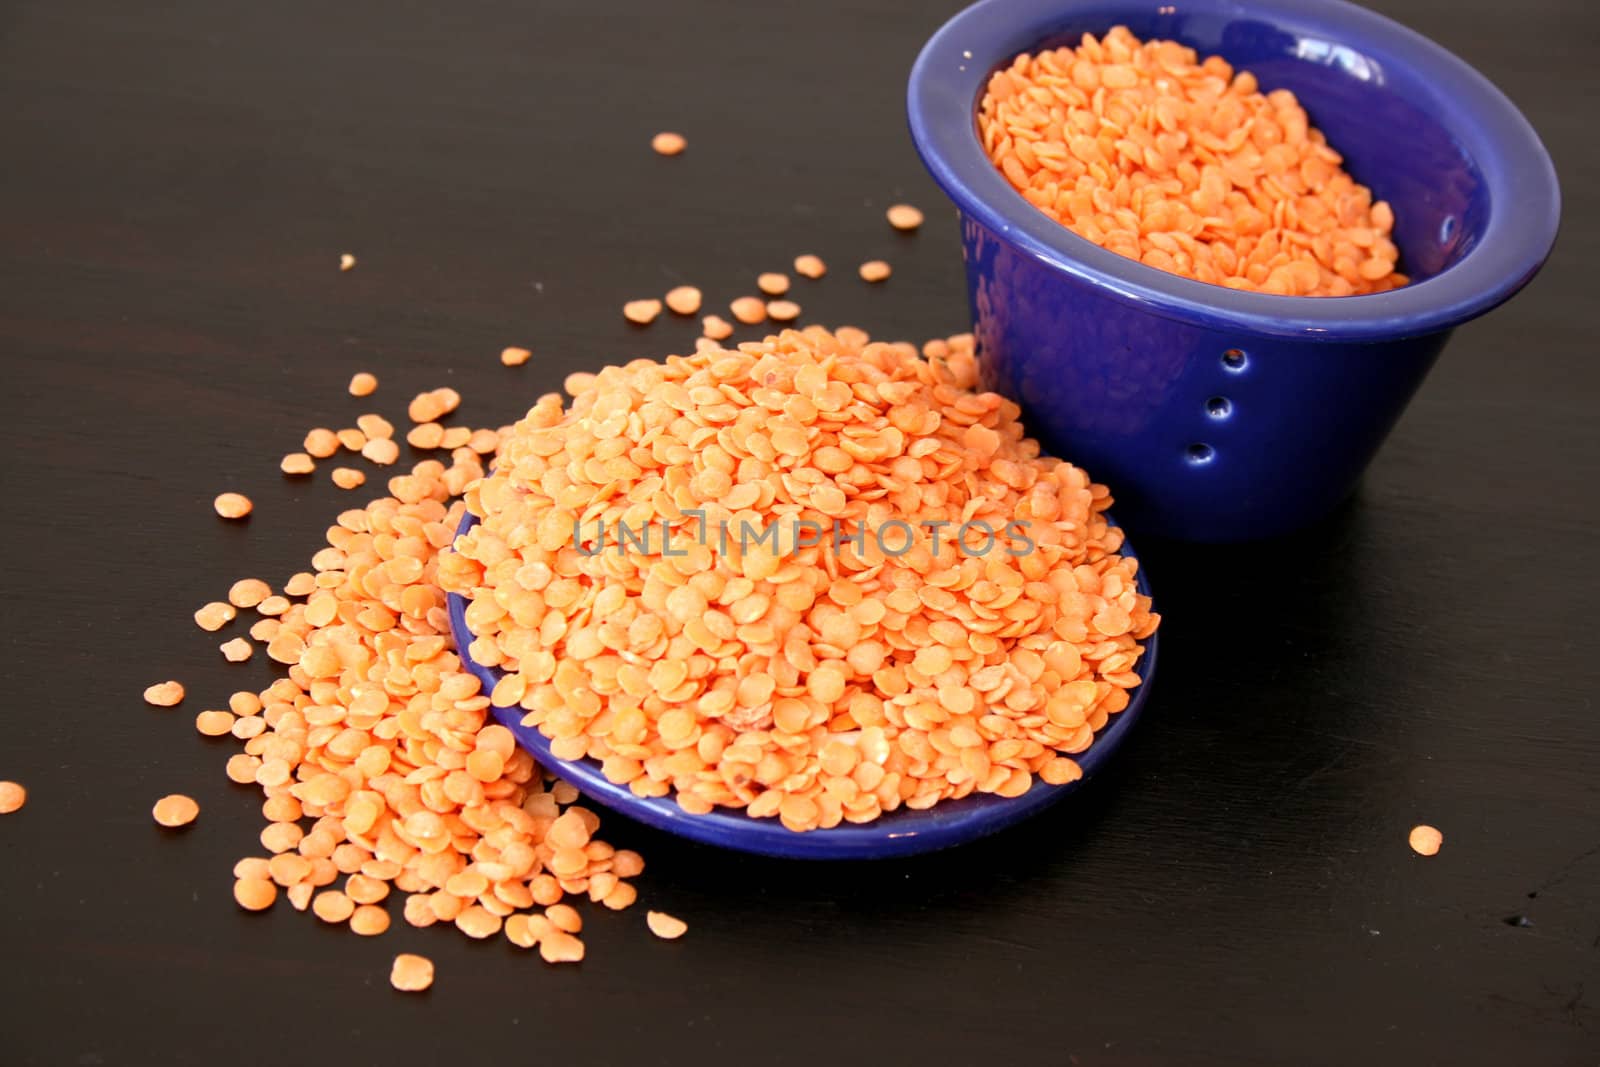 Lentils overflowing from blue ceramic bowl on a brown surface
